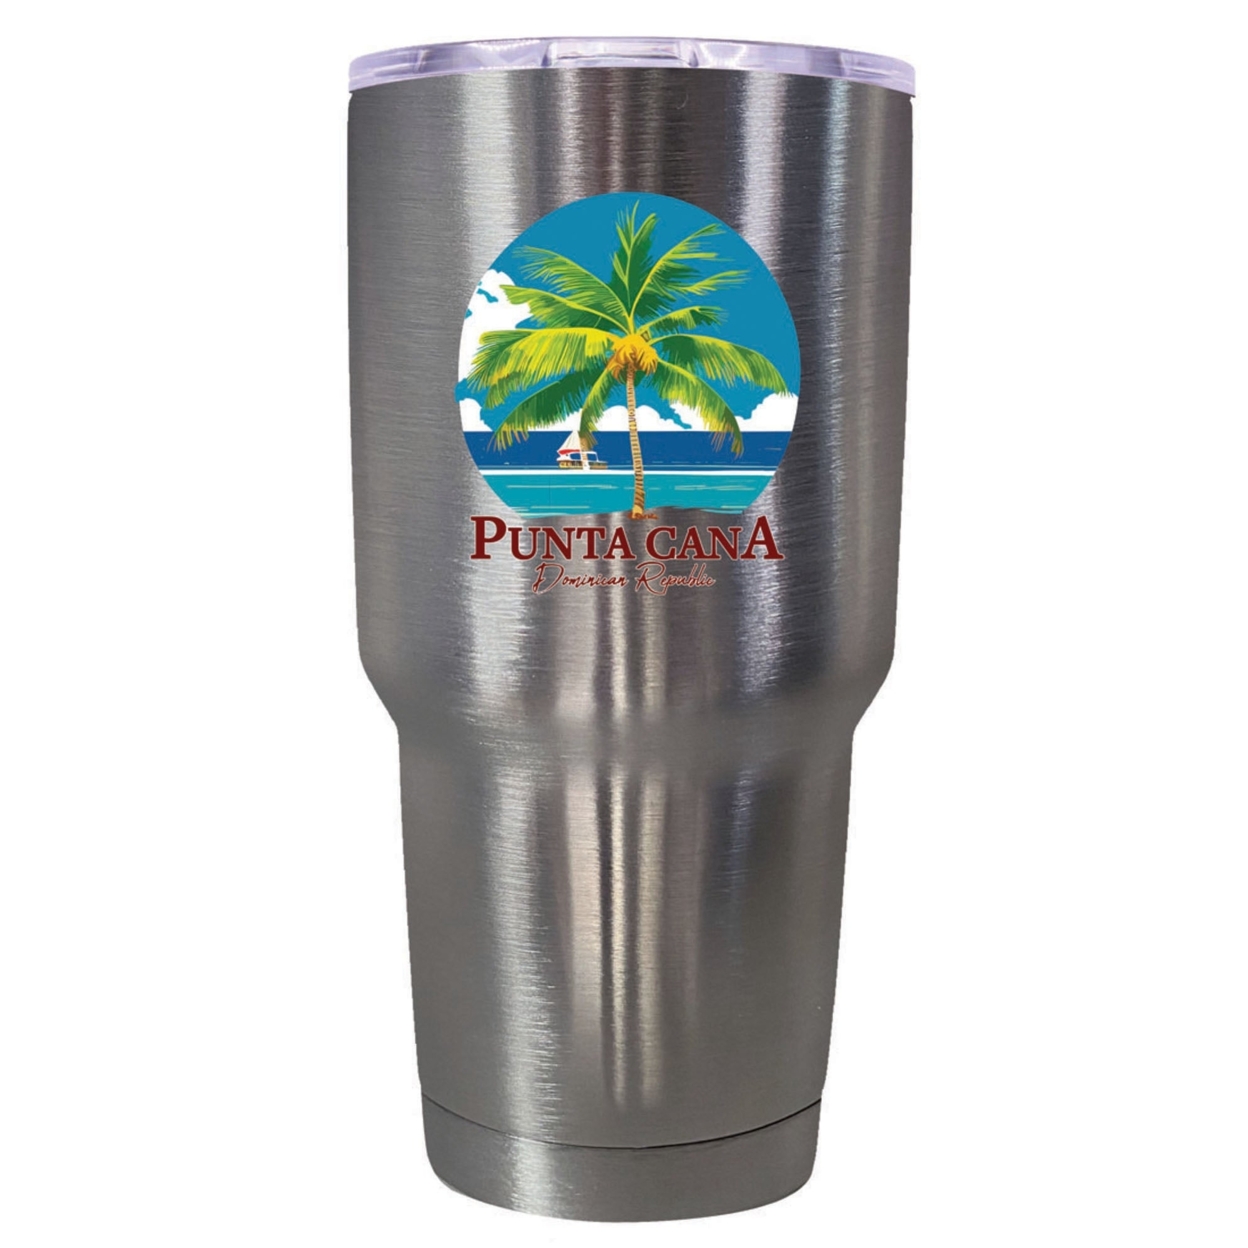 Punta Cana Dominican Republic Souvenir 24 Oz Insulated Stainless Steel Tumbler - Green, PALM